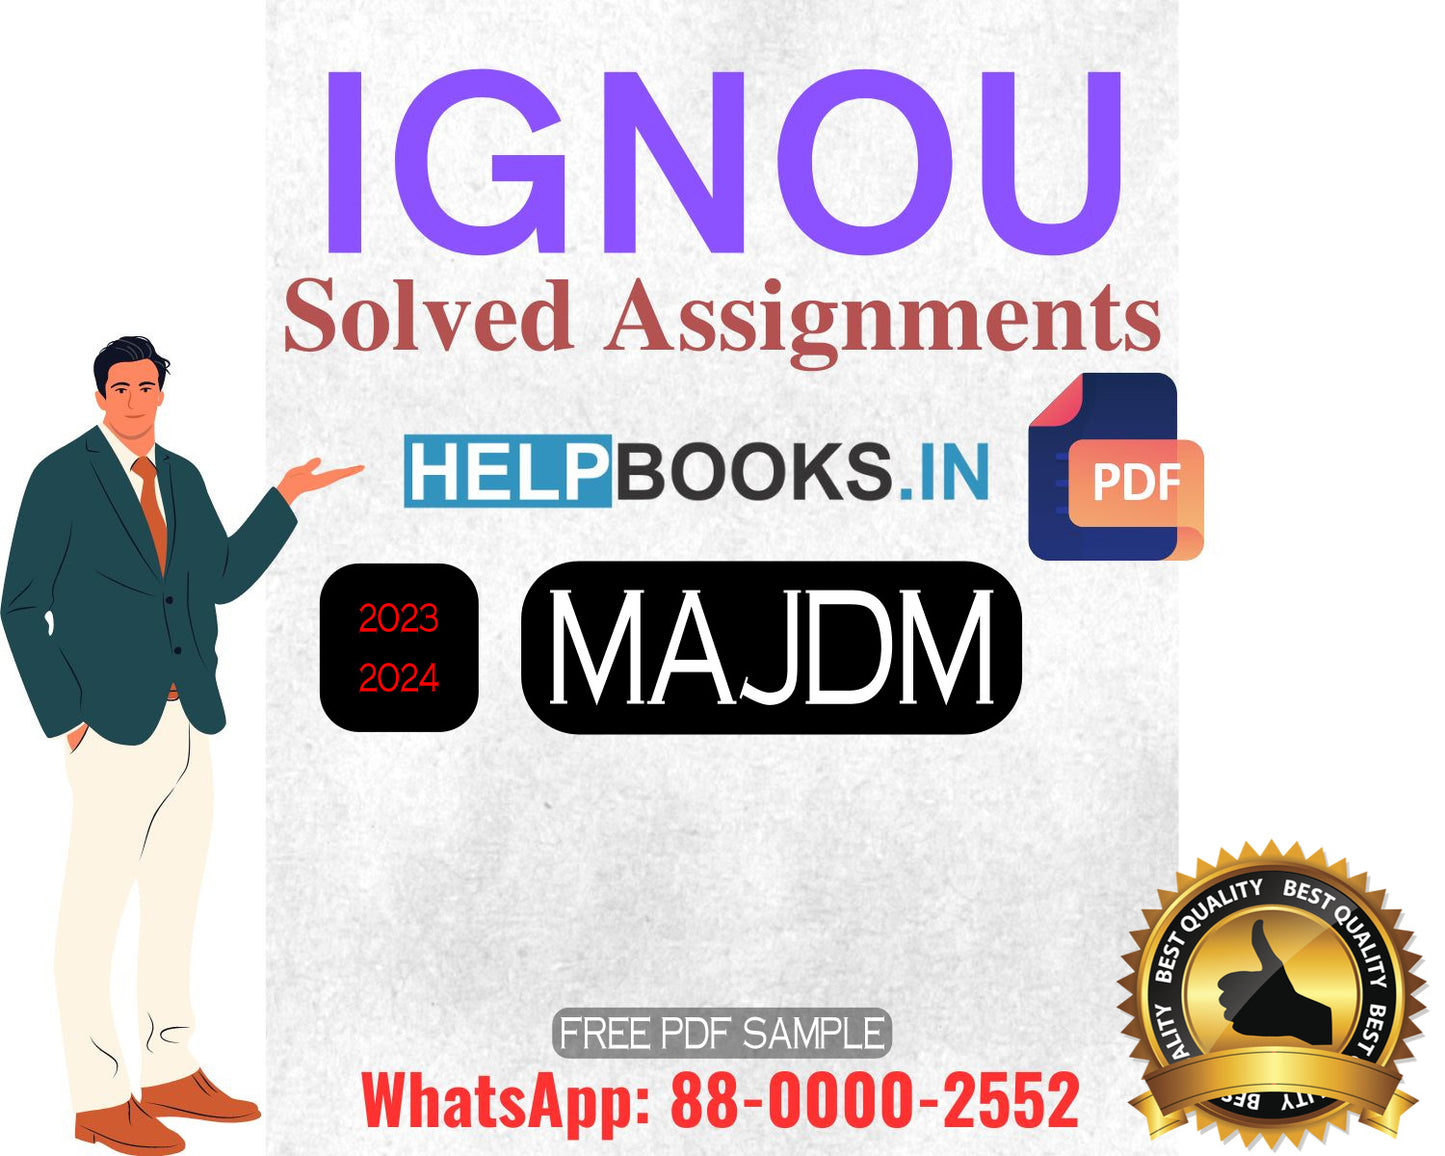 IGNOU Master's Degree Programme Latest IGNOU Solved Assignment 2023-24 & 2022-23 Sessions : MAJDM Master of Arts Journalism and Digital Media Solved Assignments